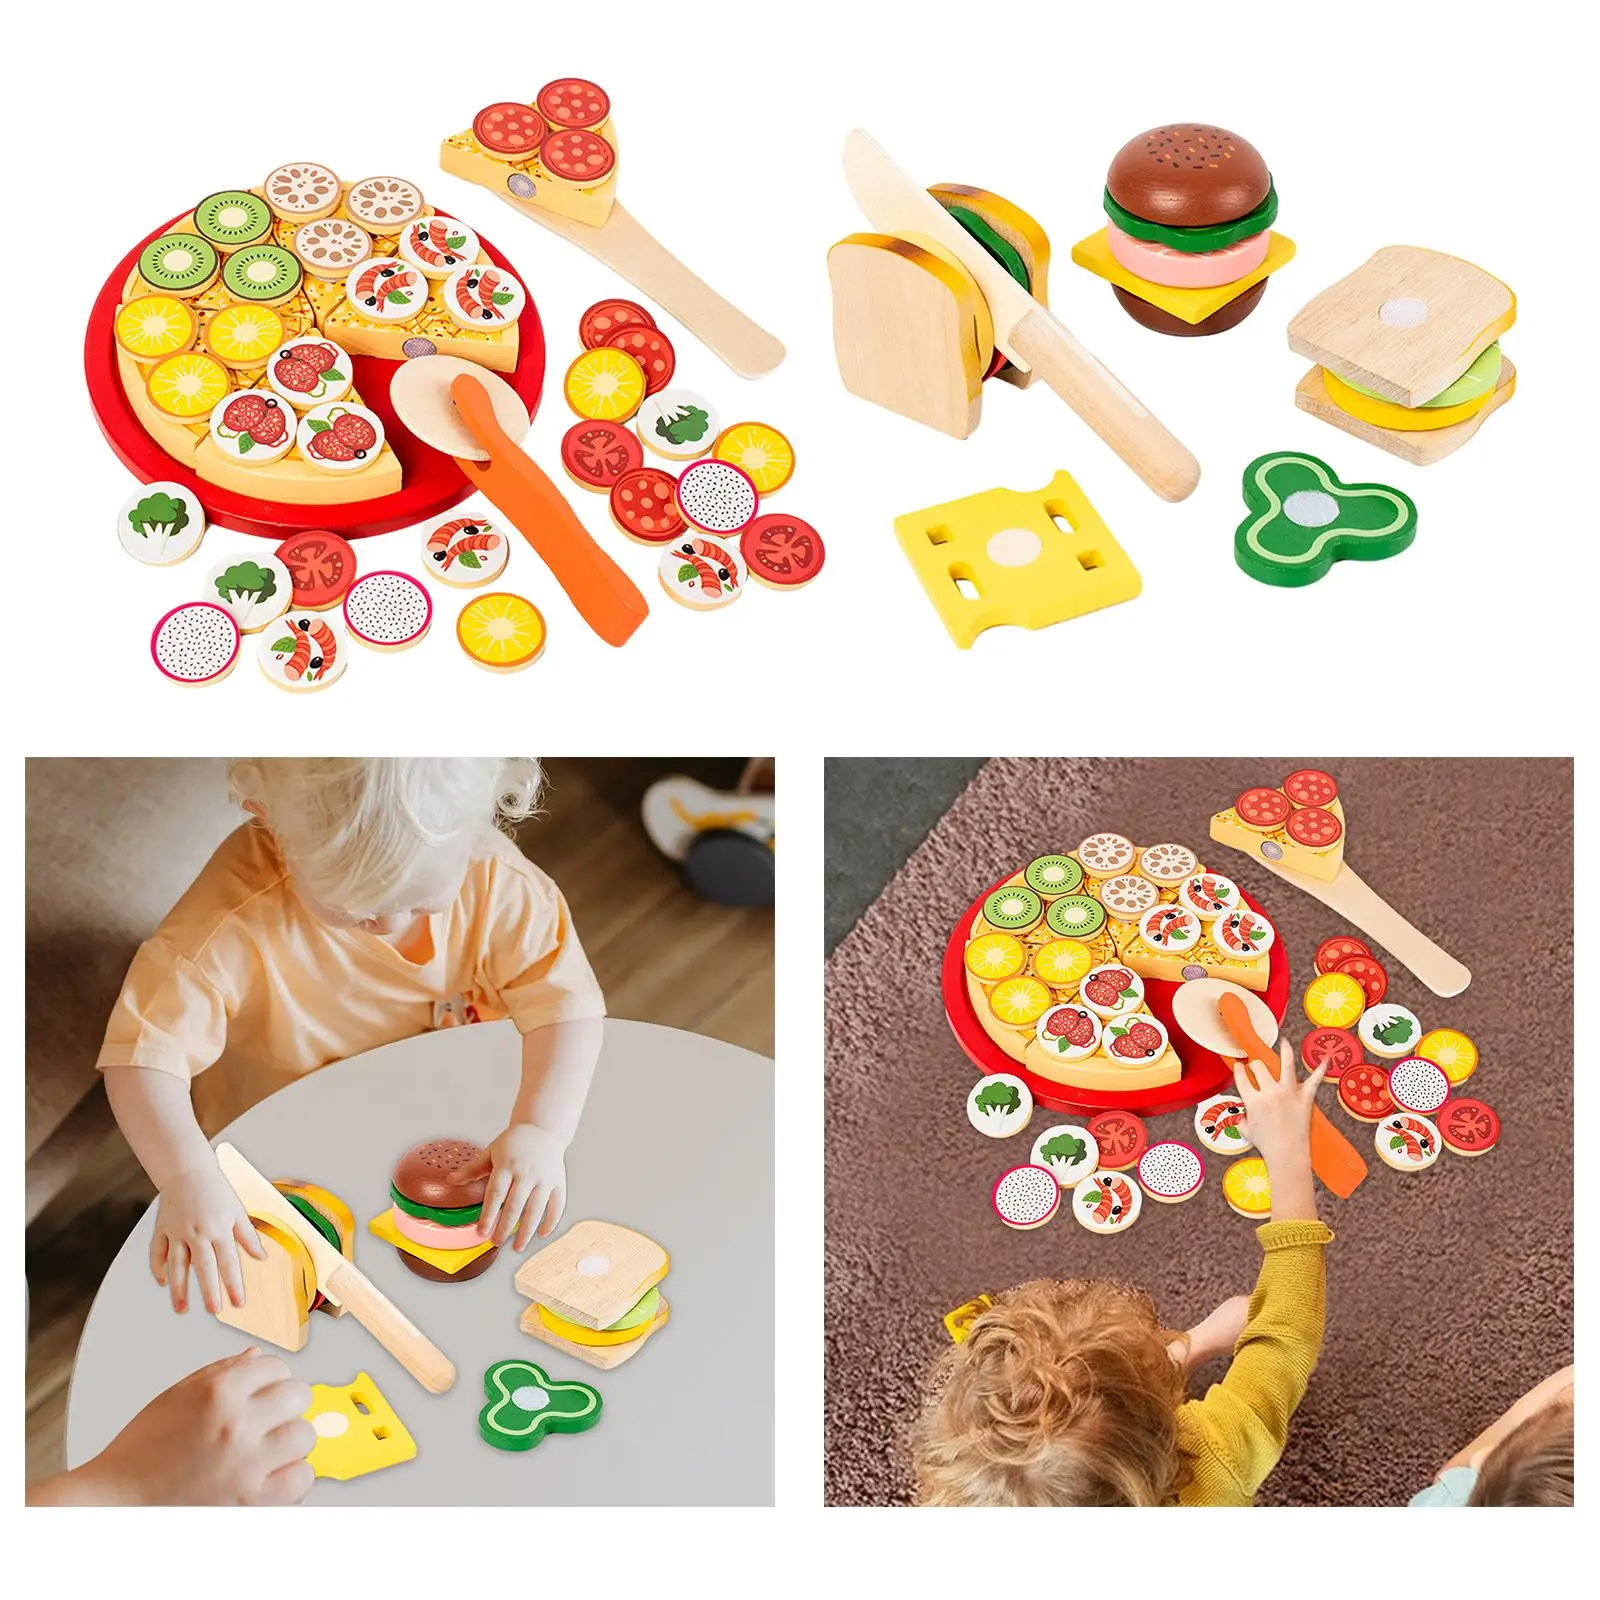 Pretend Play Food Set Preschool Role Play Kitchen Playset for Party Favors Crafts Landscape Decorations Handcraft Birthday